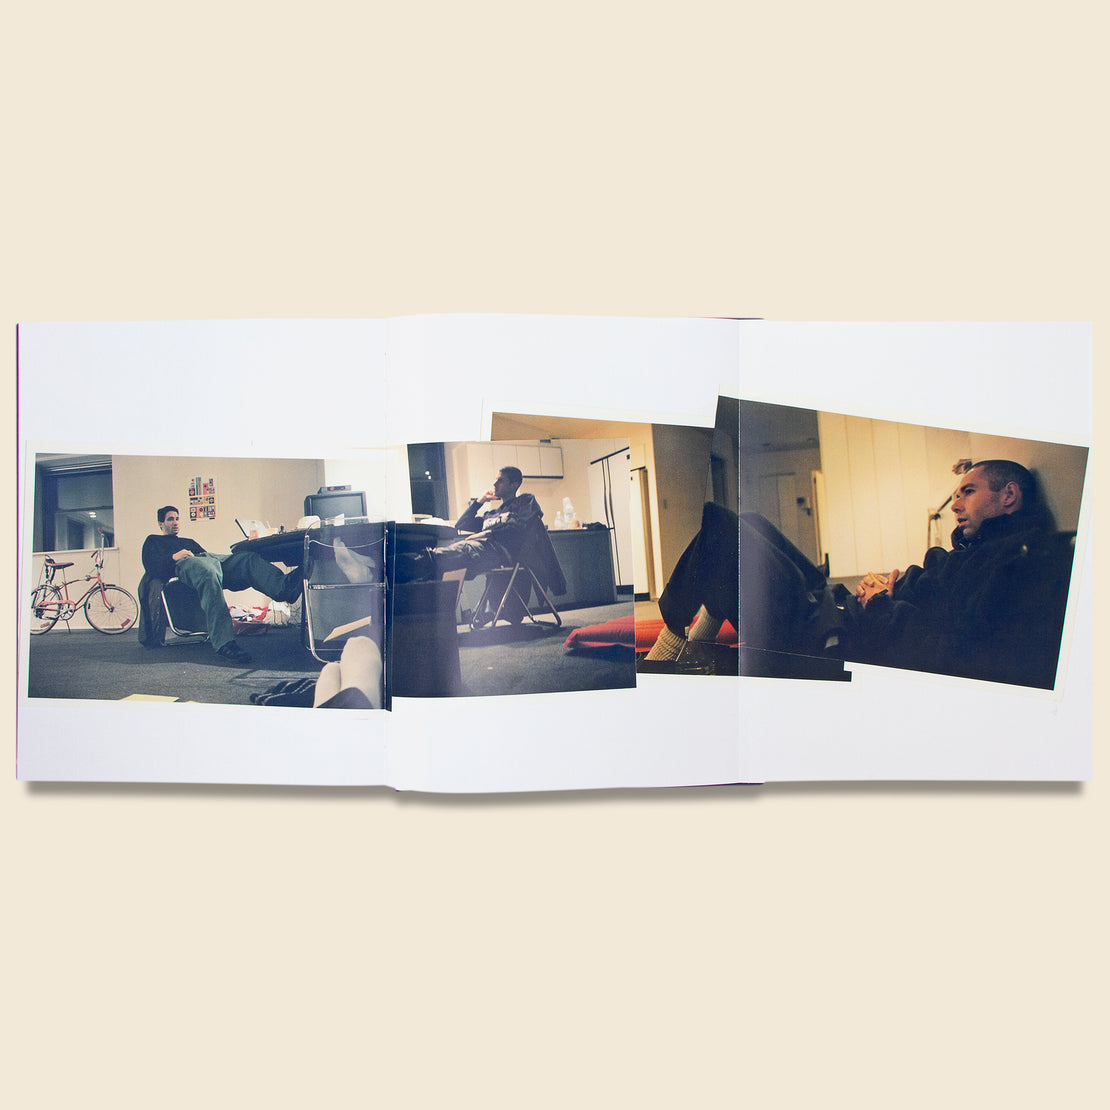 Beastie Boys by Spike Jonze - Bookstore - STAG Provisions - Home - Library - Book